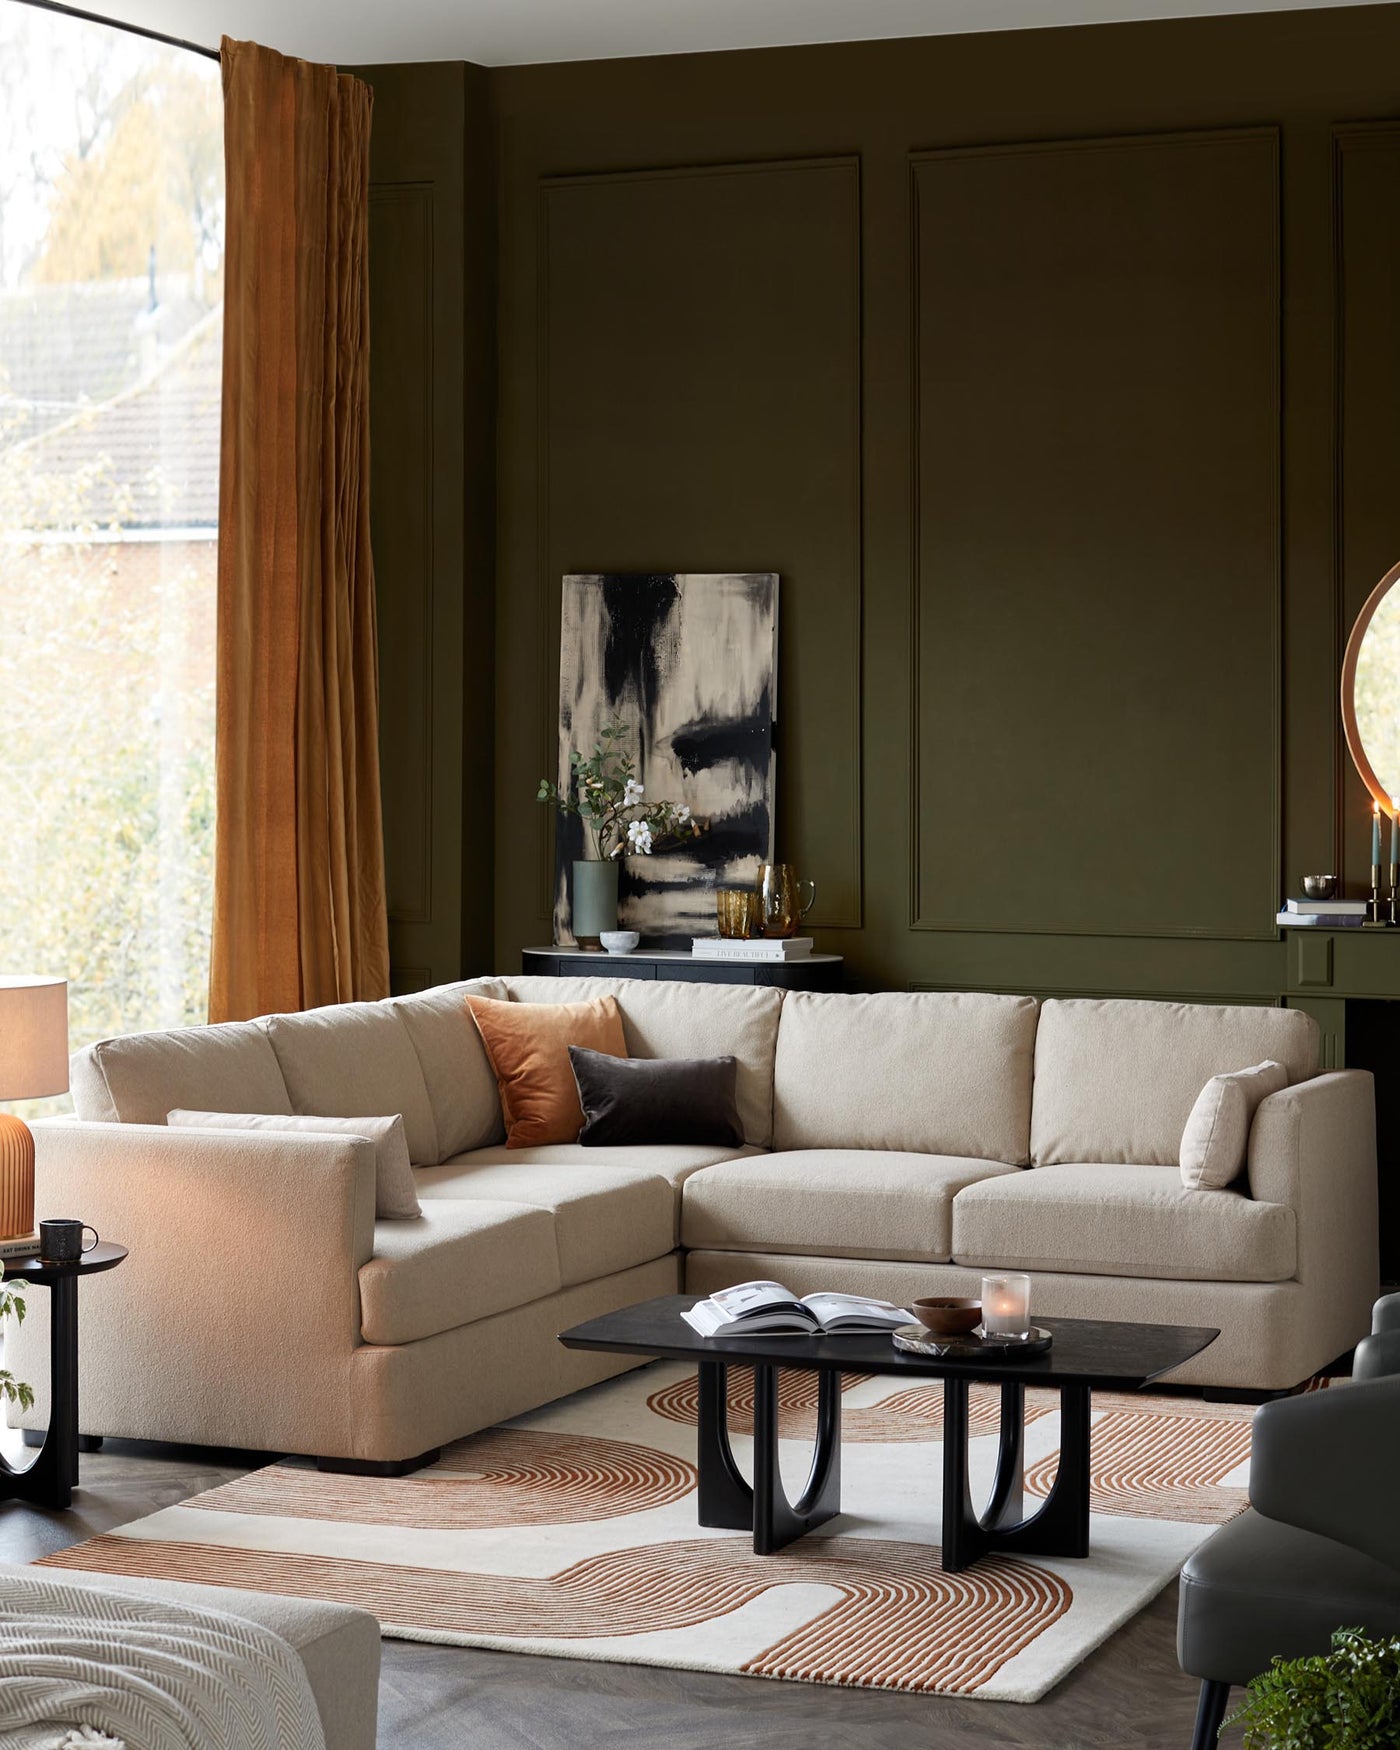 A contemporary modular sofa in a warm beige fabric dominates the space, with plump back cushions and a chaise segment for lounging. A sleek black coffee table with an organic, curved base and a matching round side table contribute minimalist elegance. These pieces are complemented by a soft, geometric-patterned area rug in neutral tones, adding a layer of texture and interest to the room.